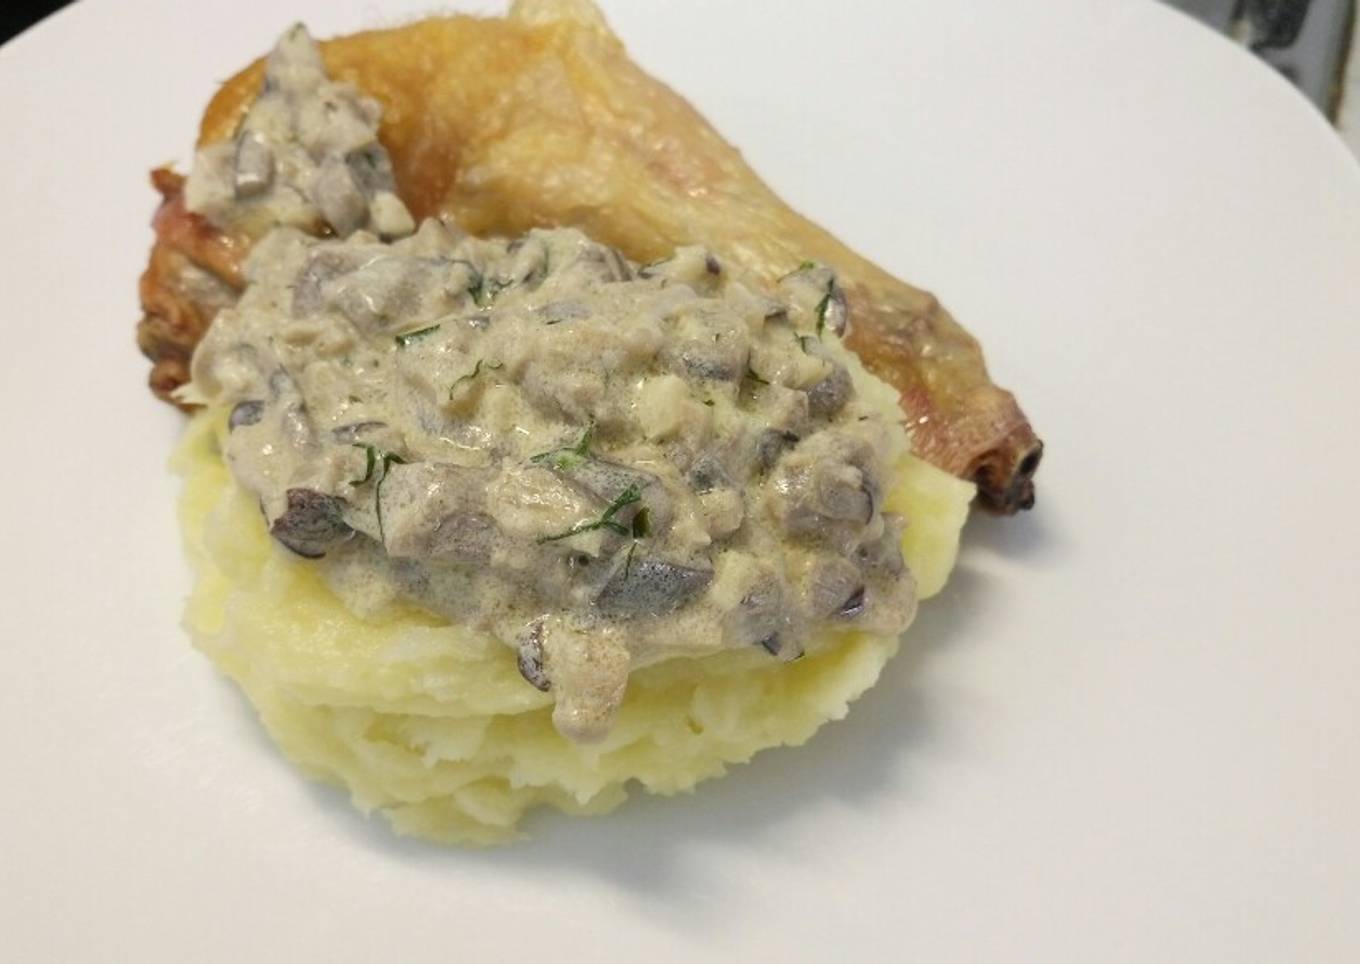 Chicken and mash with a creamy mushroom and dill sauce